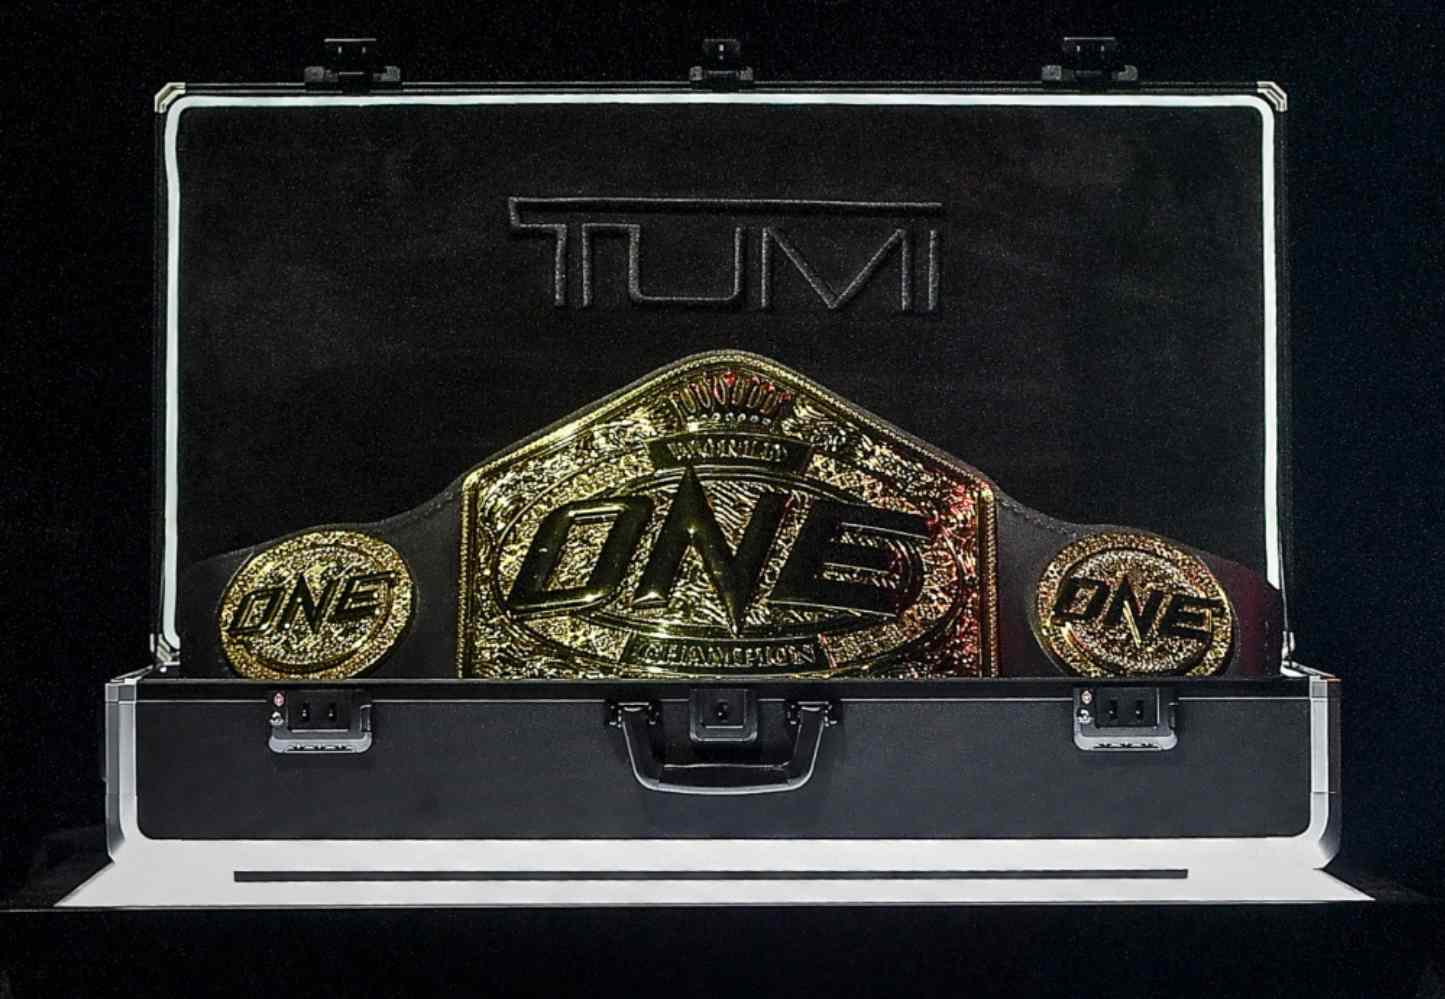 One Championship enters long-term deal with Tumi